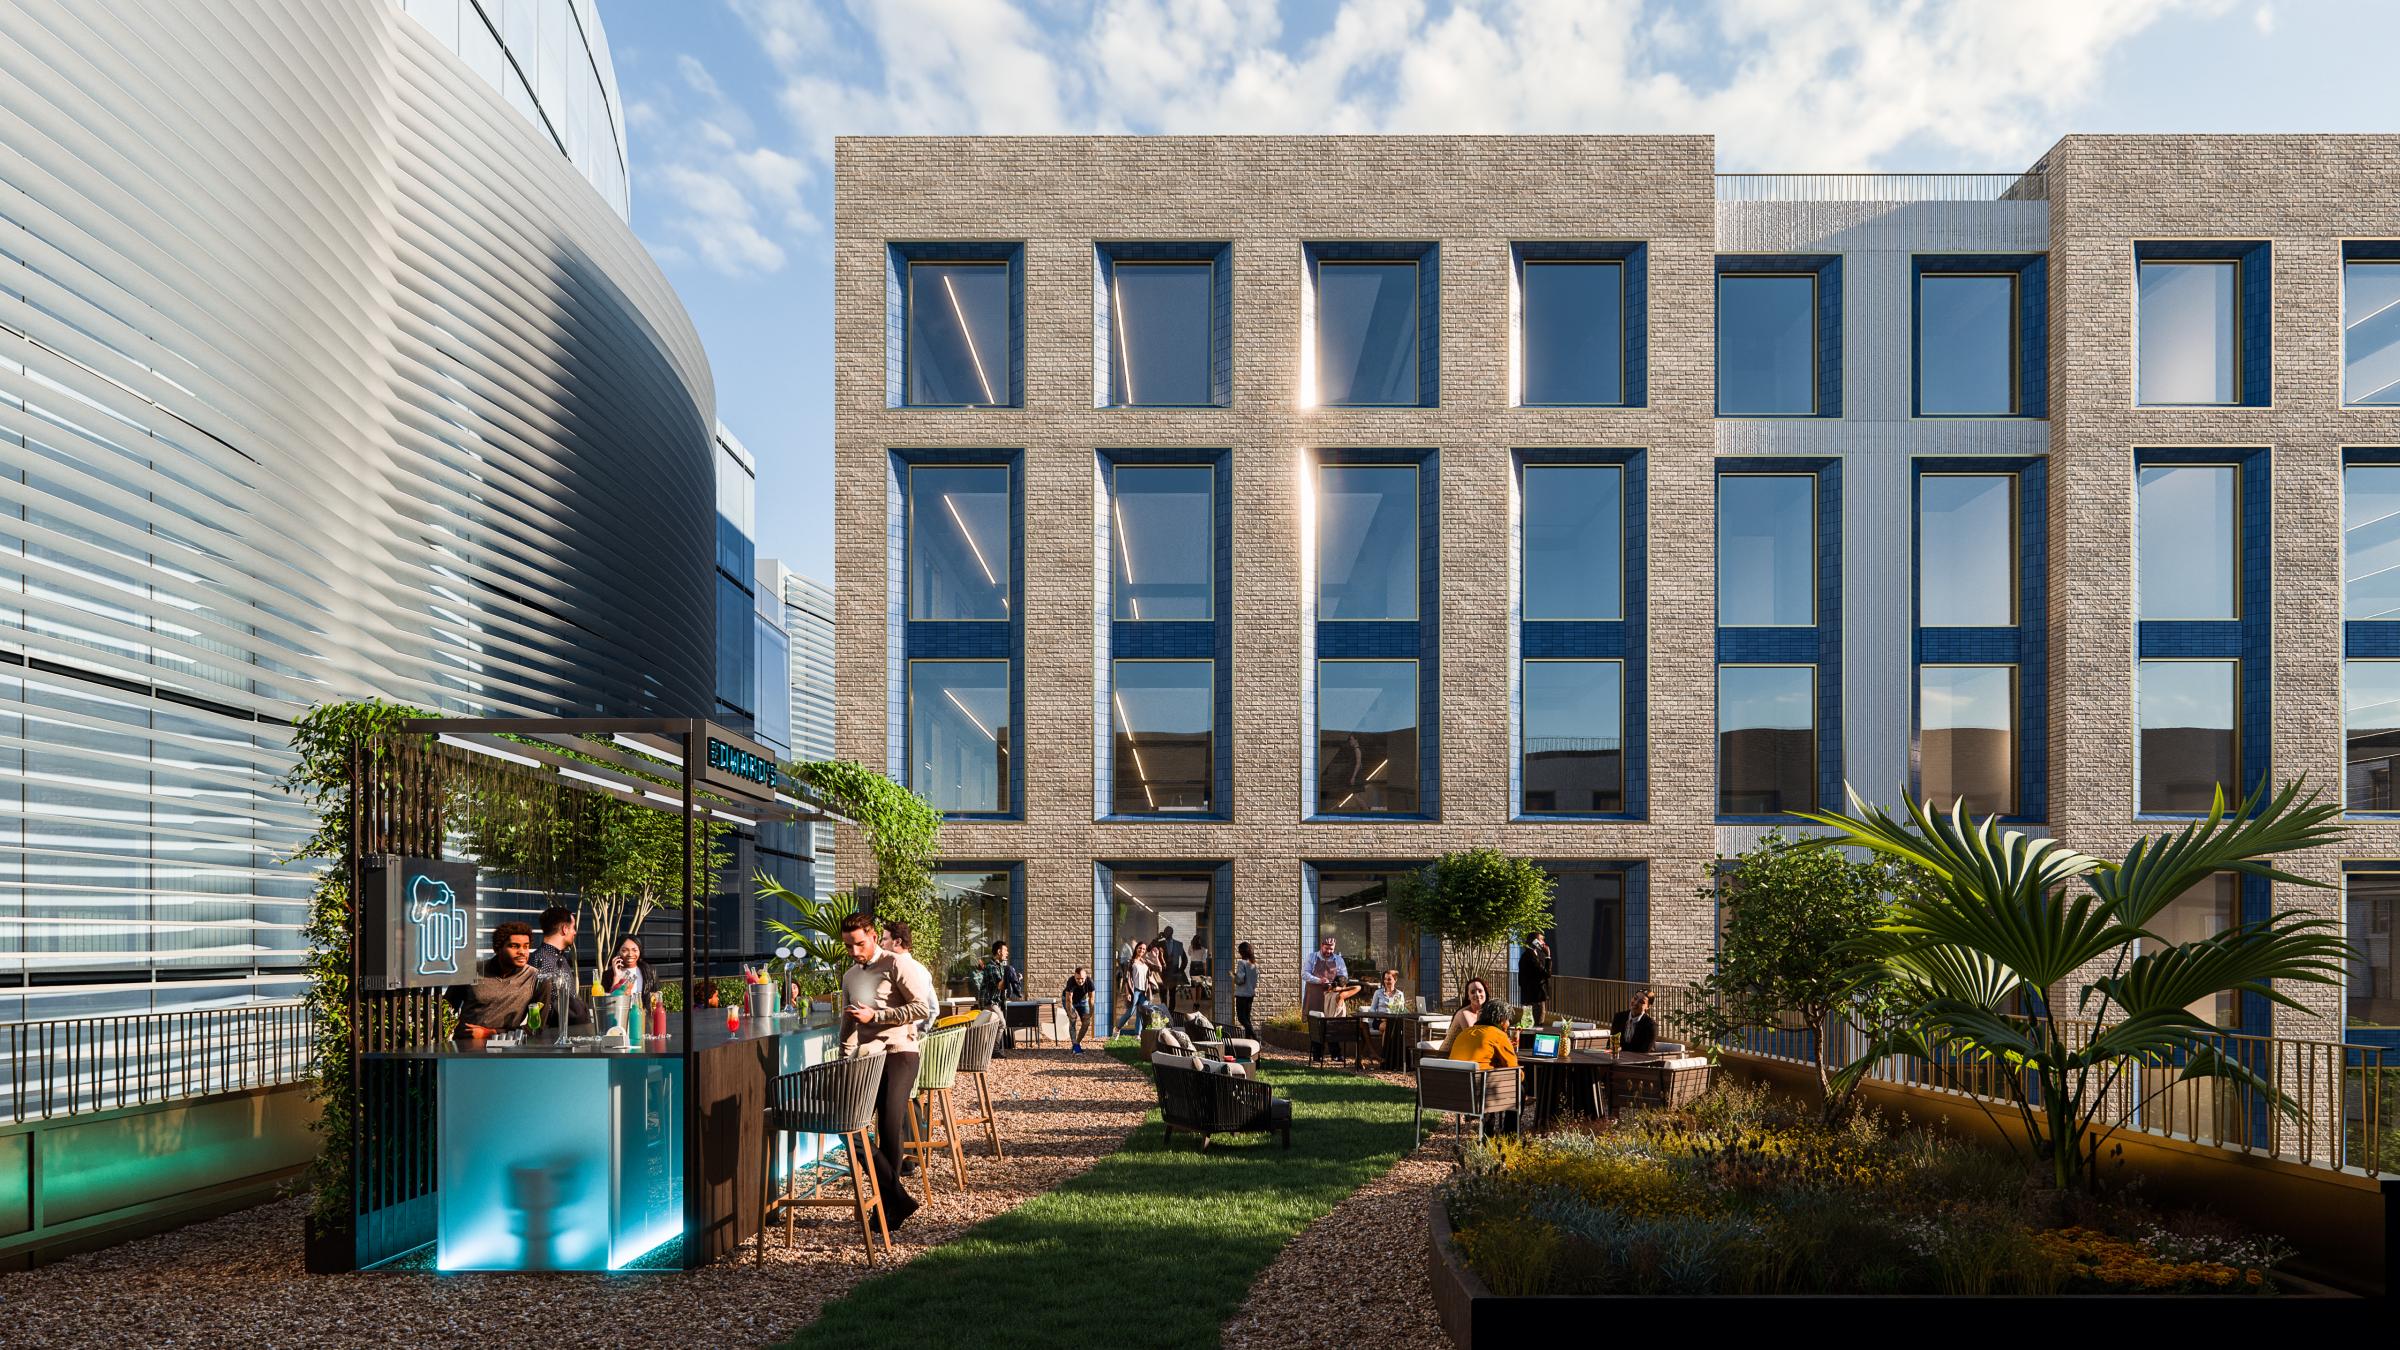 This is what the Edward Street Quarter development will look like when complete